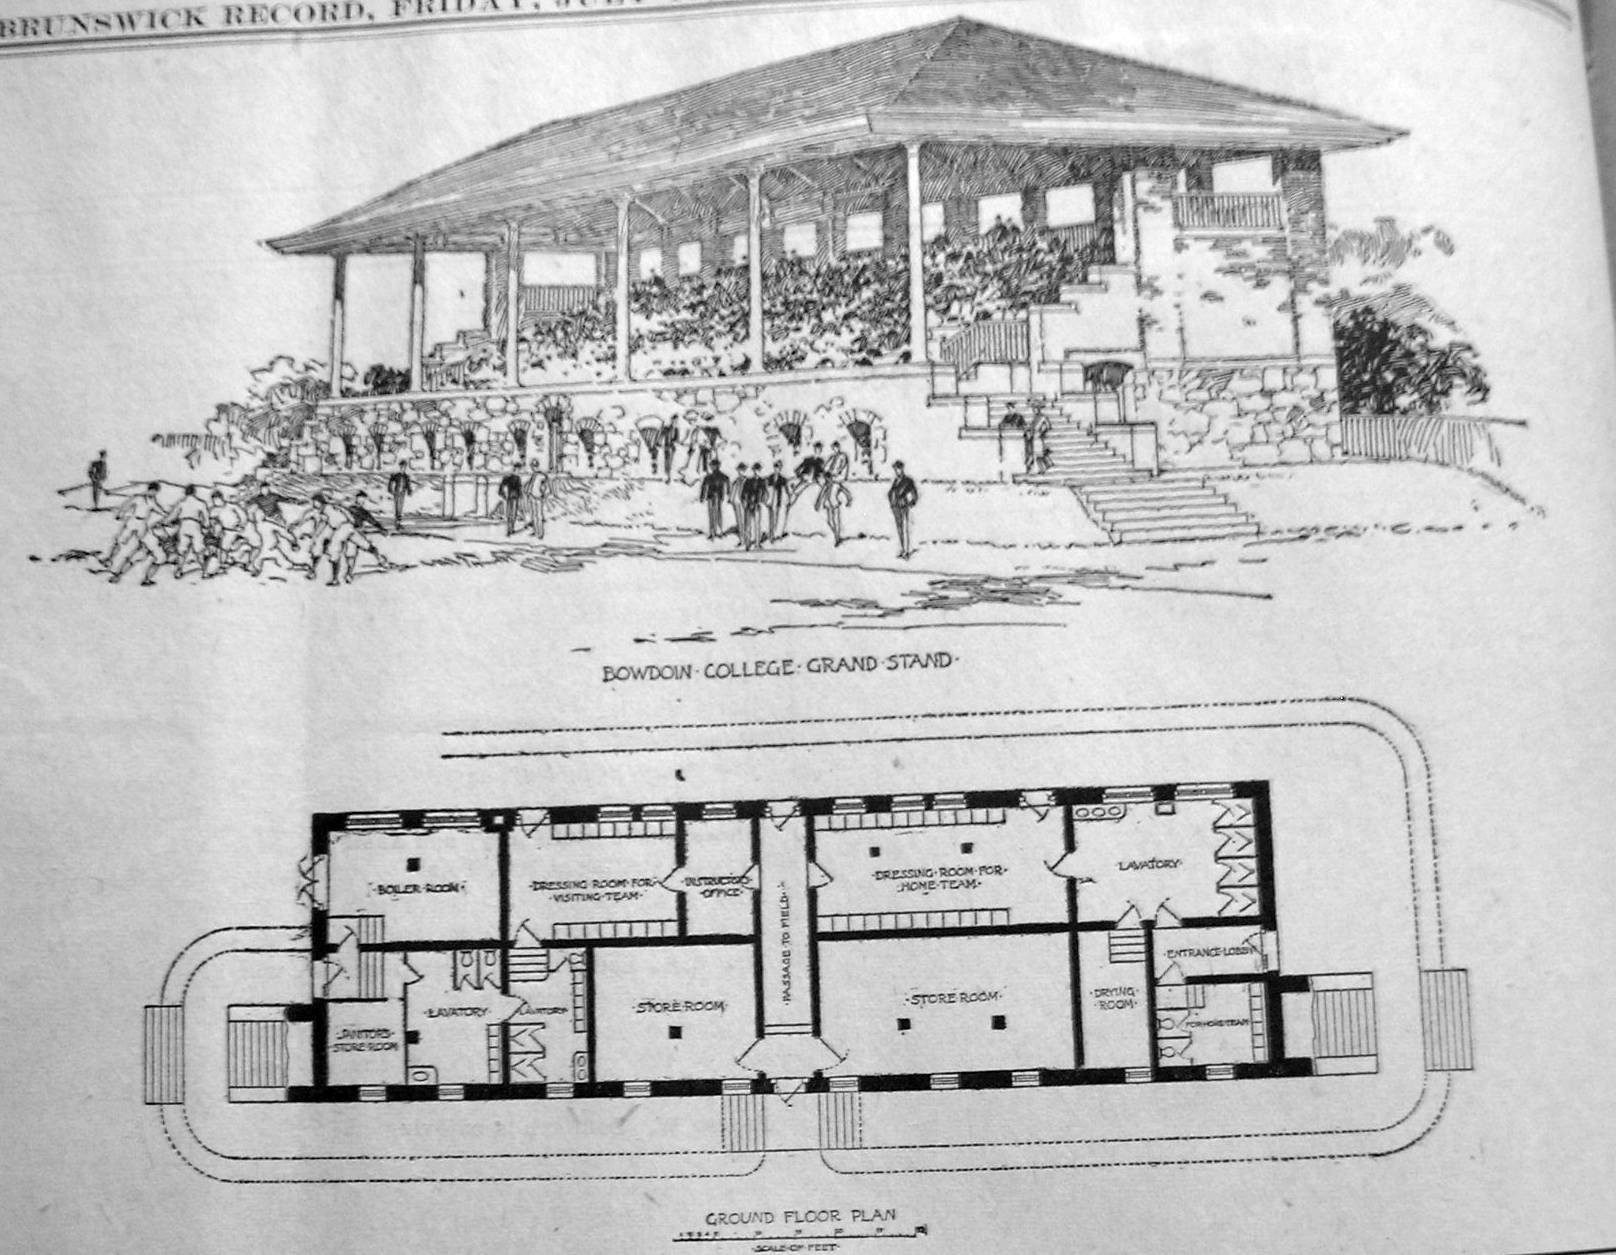 Brunswick Record rendering and plan of grandstand 7.10.03 2A.jpg